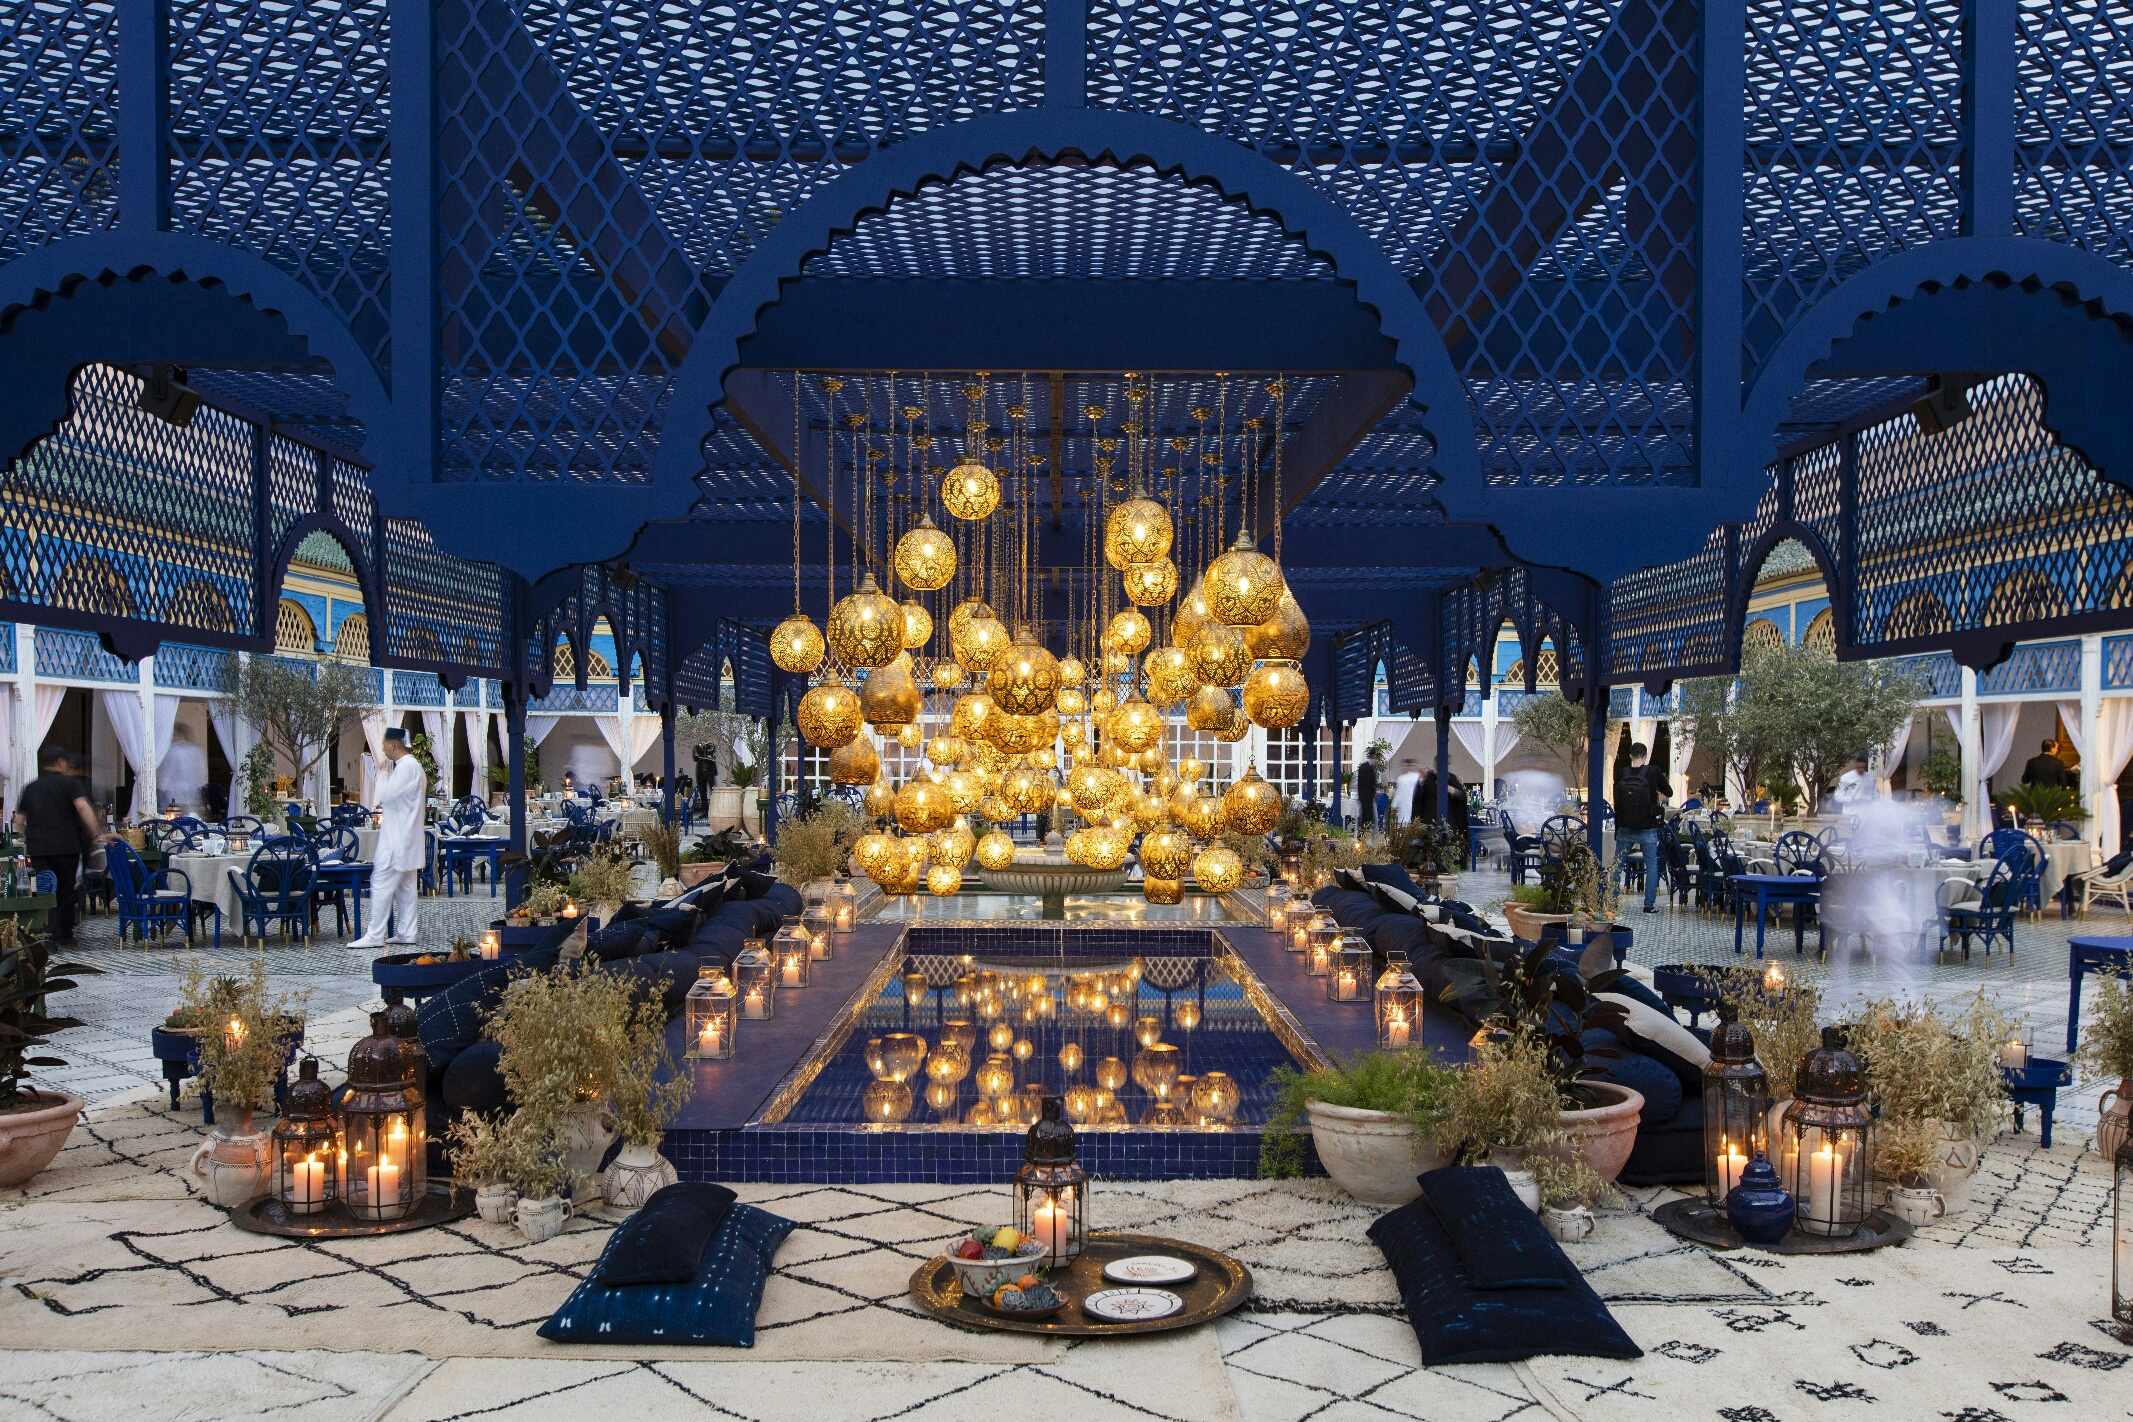 Read more about the article DIOR Welcome Dinner | Marrakech